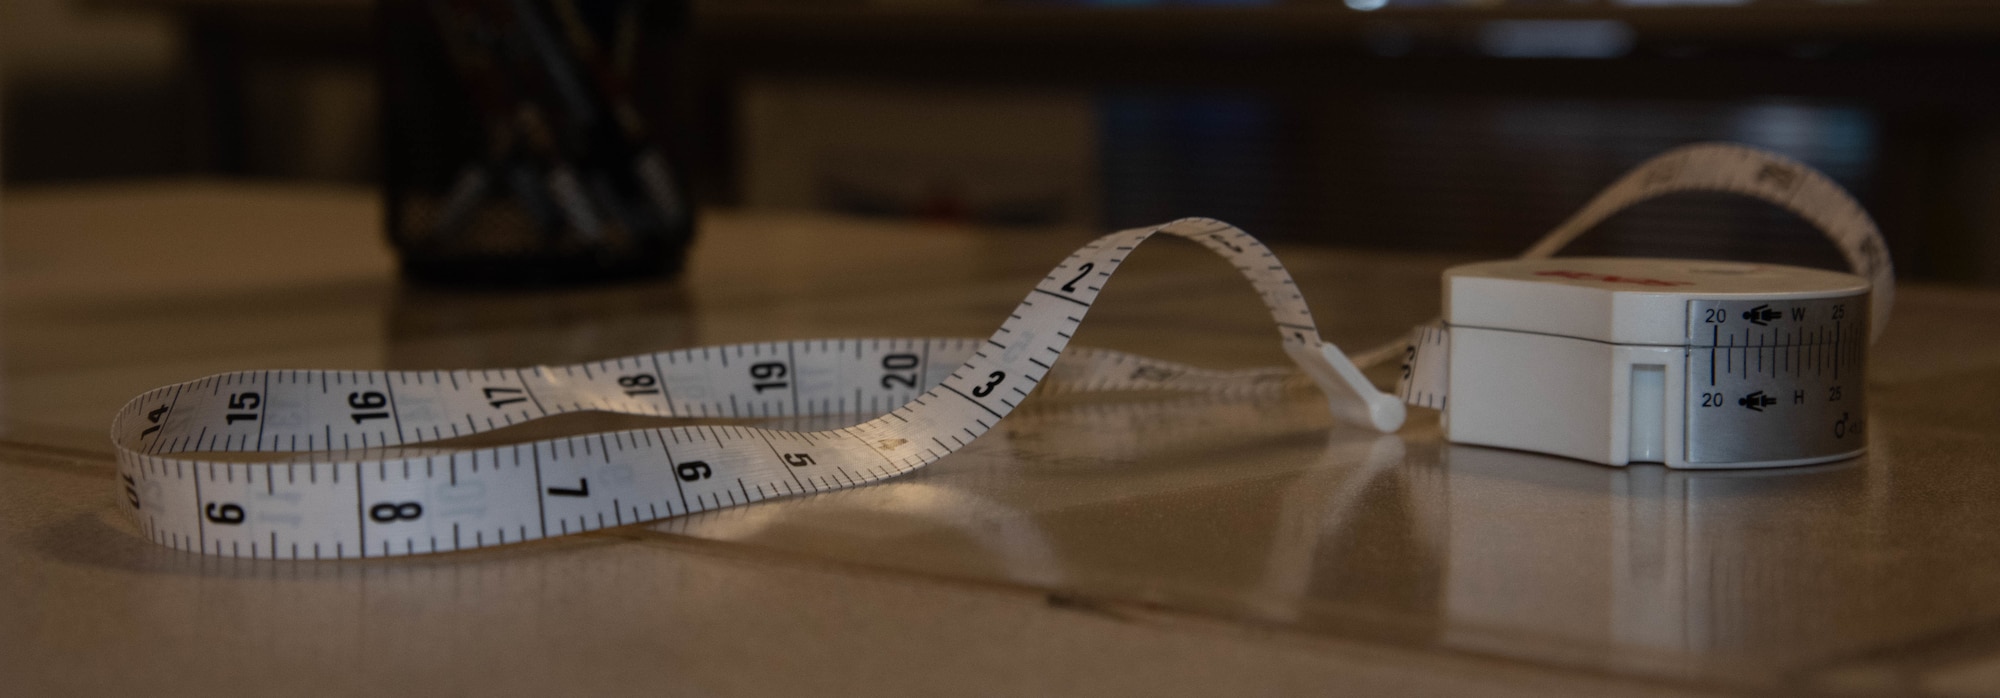 A tape measure is unrolled